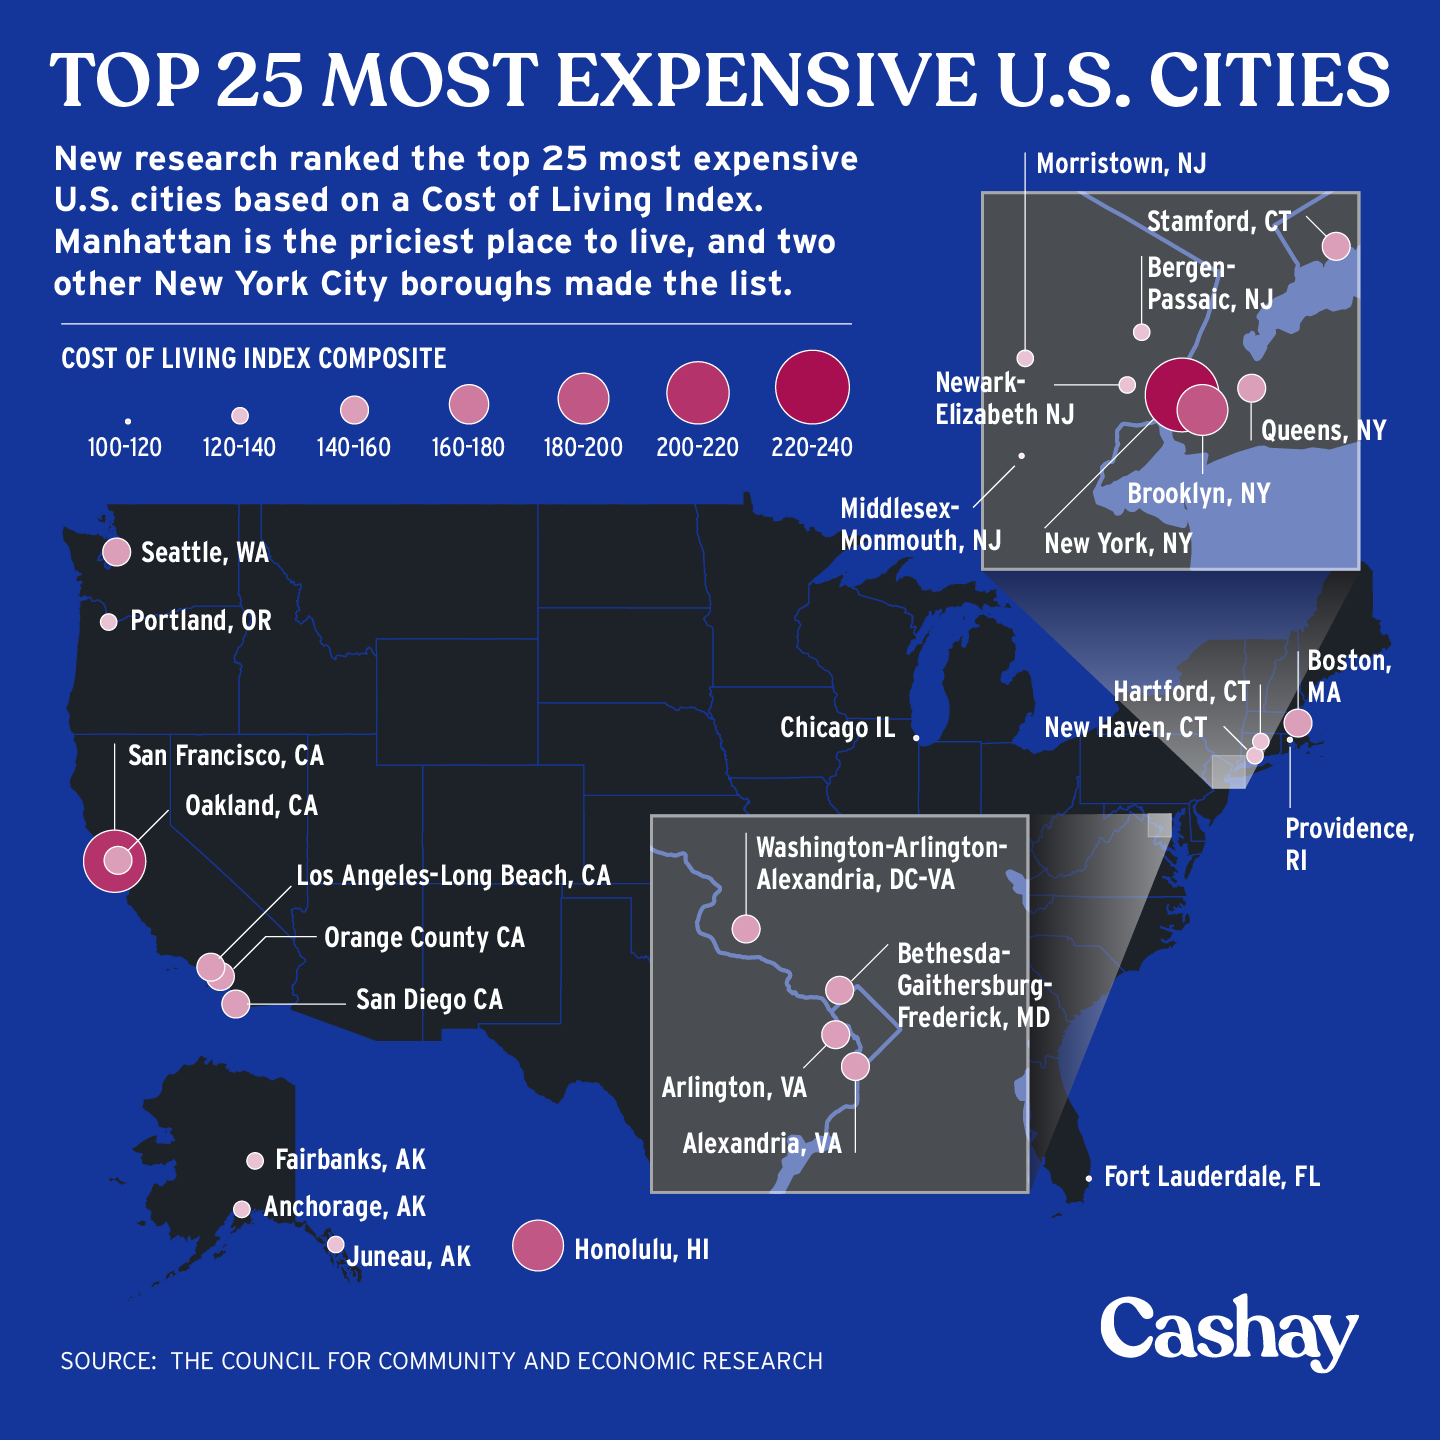 The 25 most expensive U.S. cities to live in Cashay